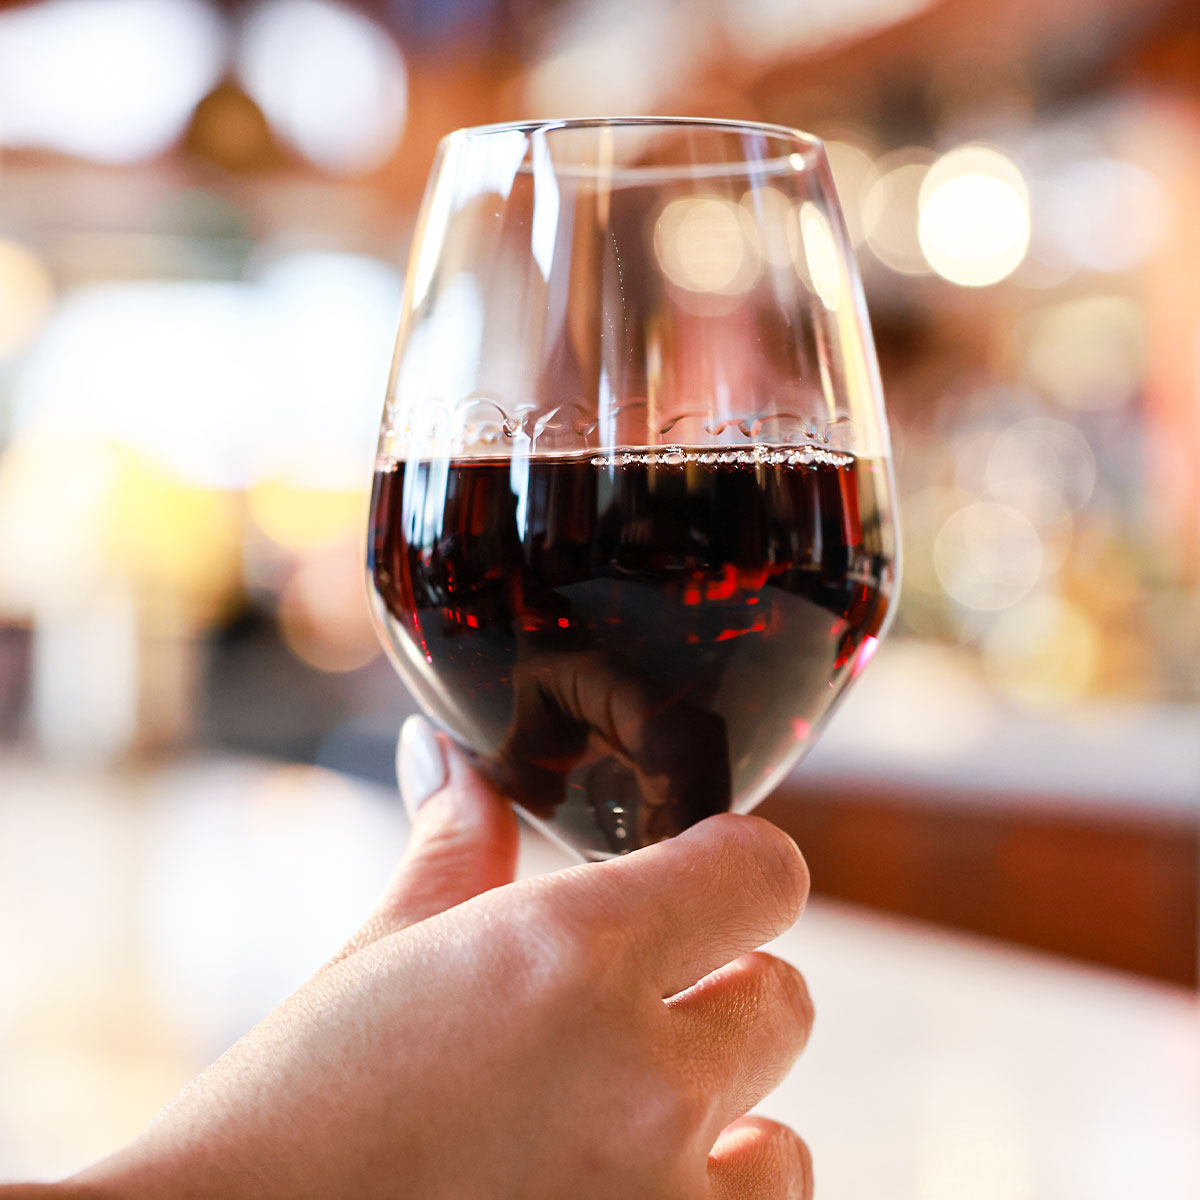 Today, the wine is the occasion. Come celebrate National Red Wine Day at Ted’s. #OnlyAtTeds